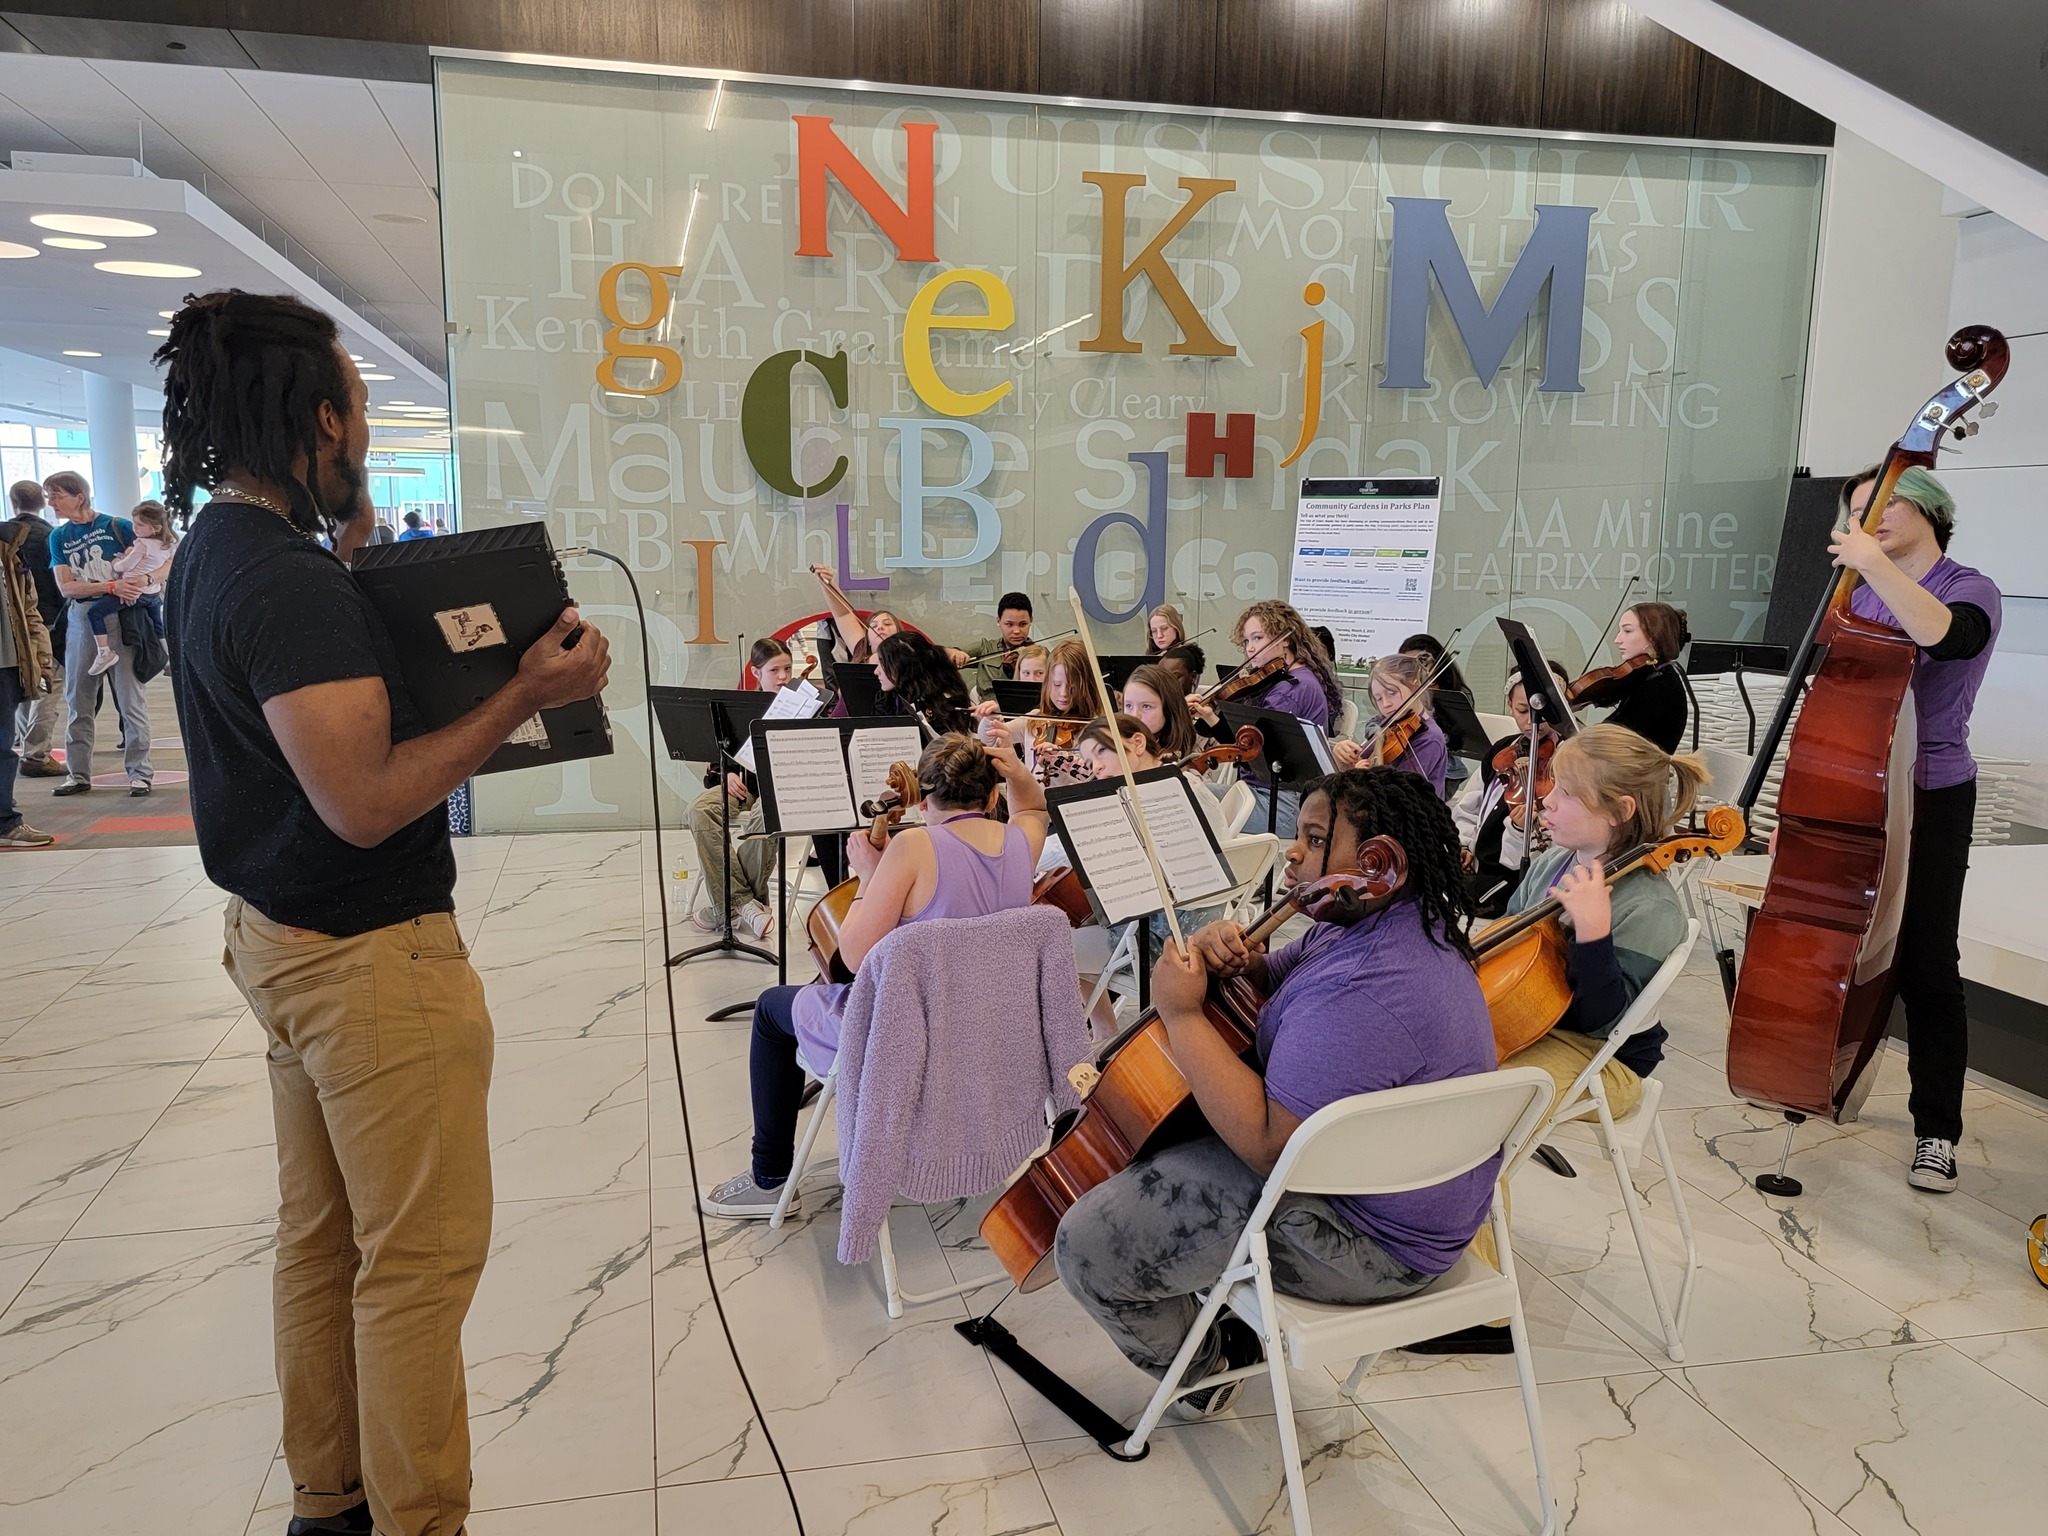 A man with dark skin holds a screen up for a group of young musicians with instruments.